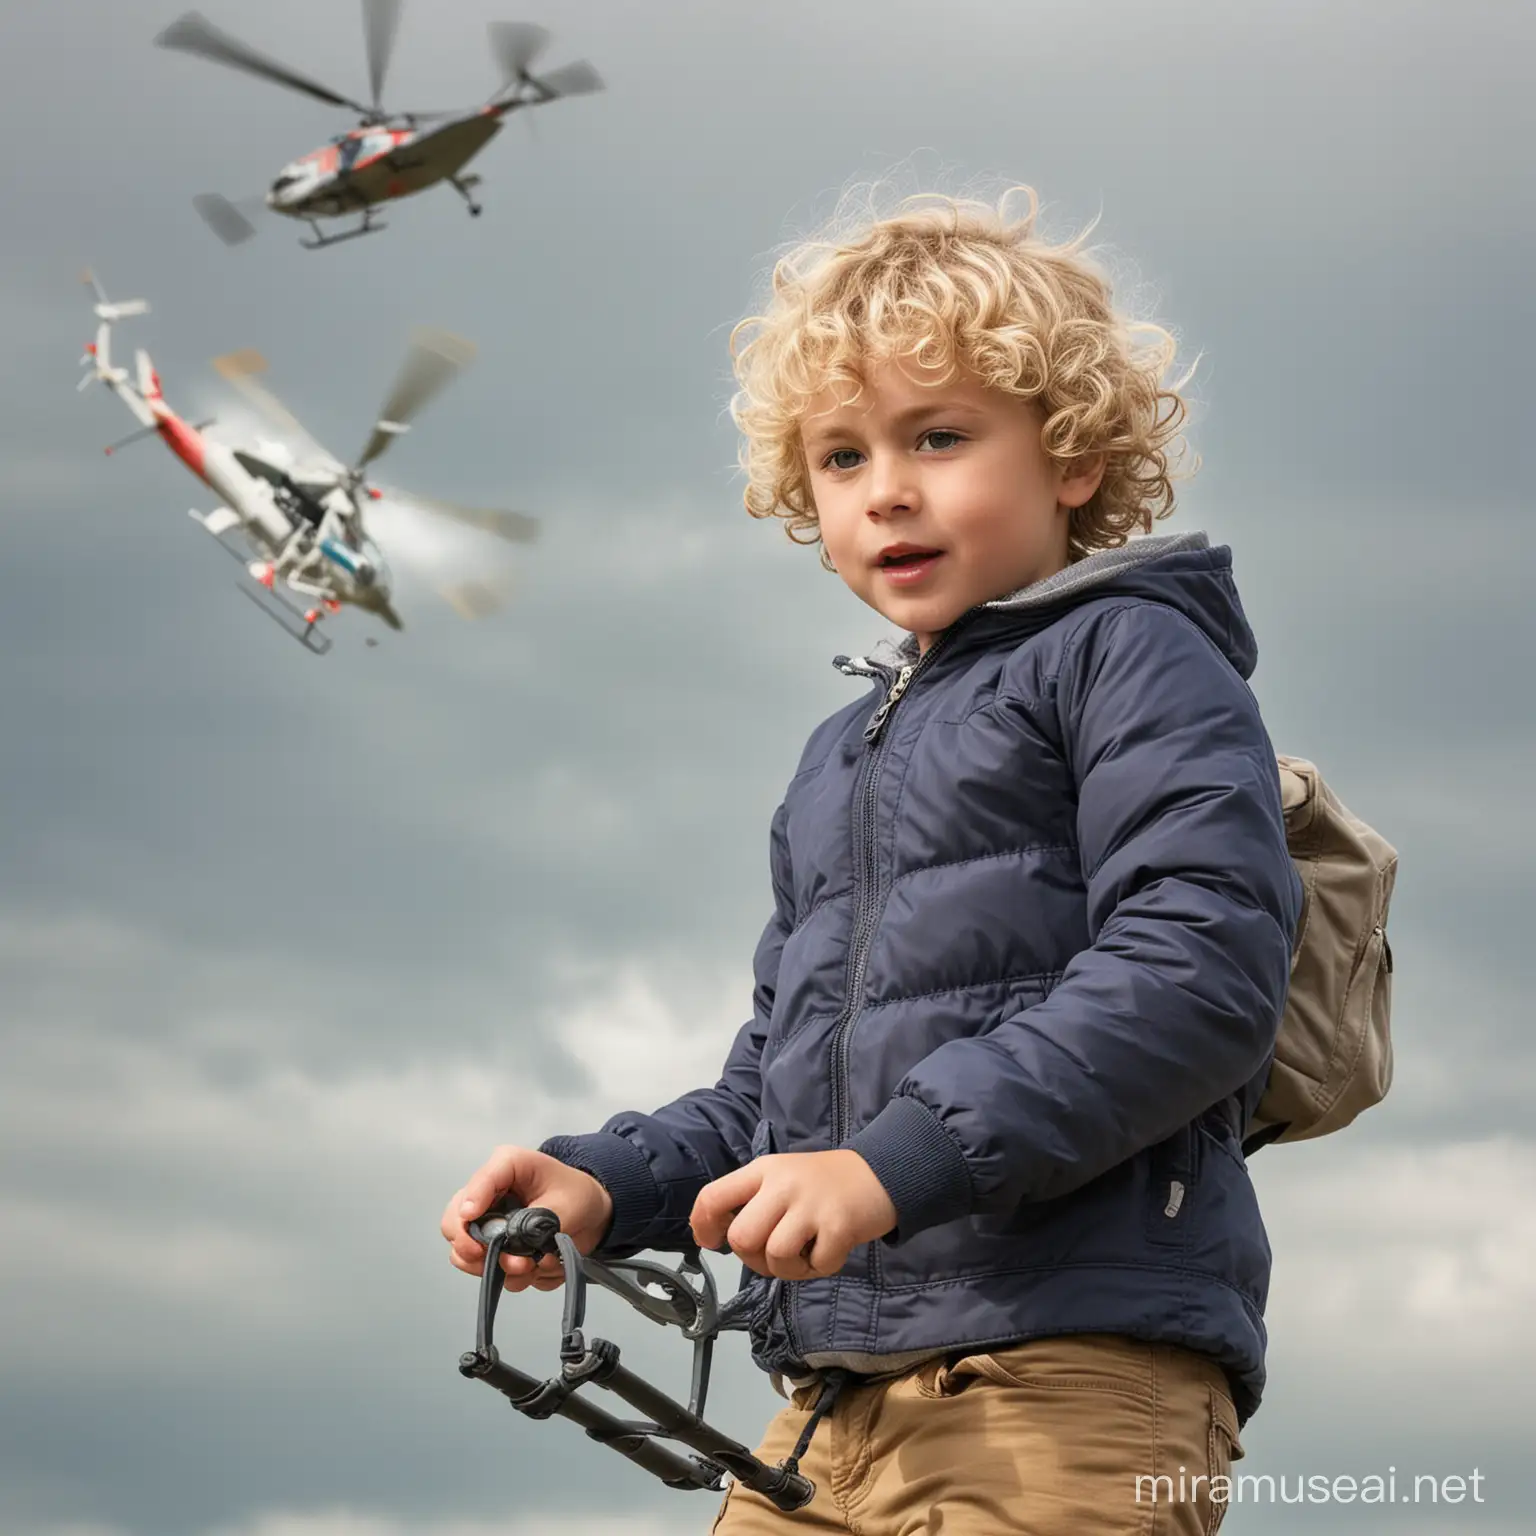 Little blond boy with curly hair is flying a helicopter